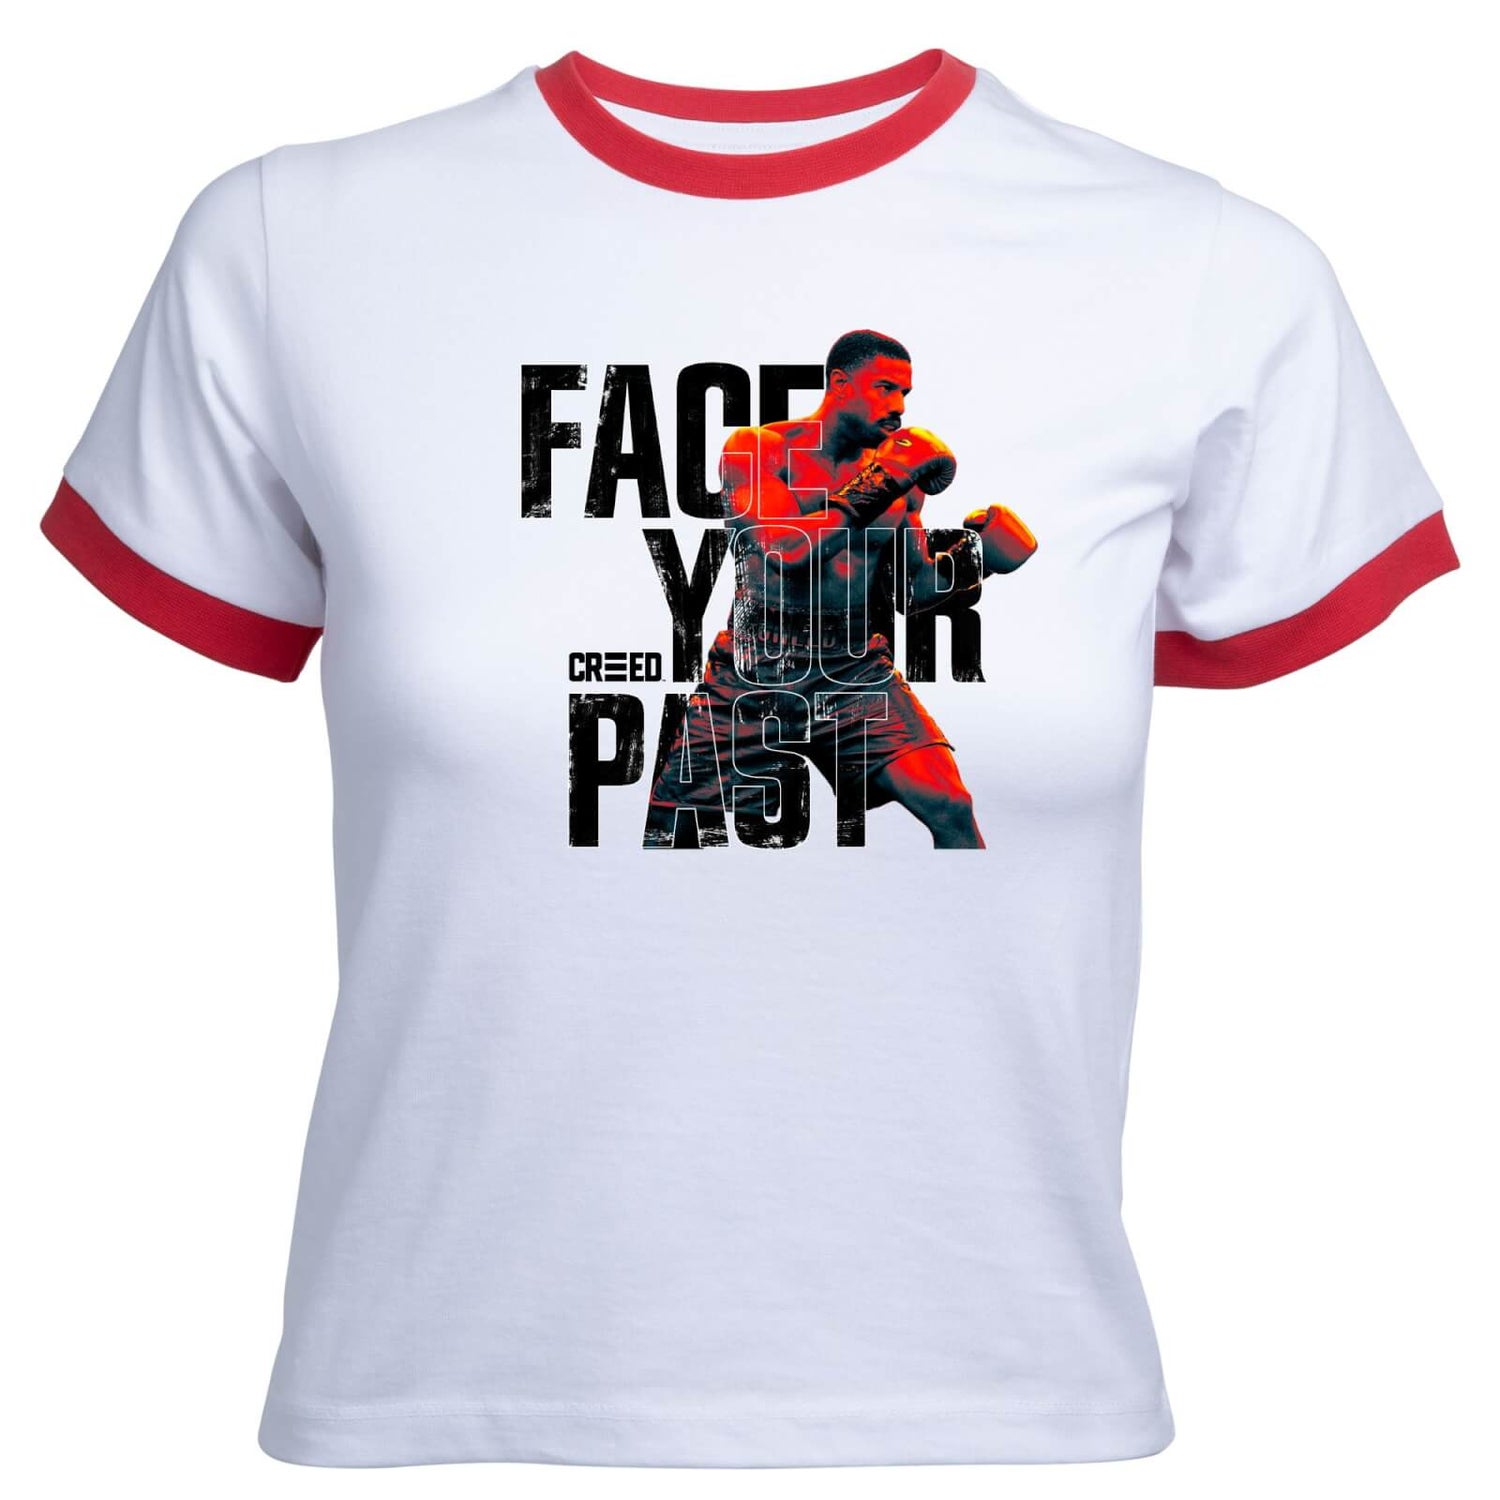 Creed Face Your Past Women's Cropped Ringer T-Shirt - White Red - XS